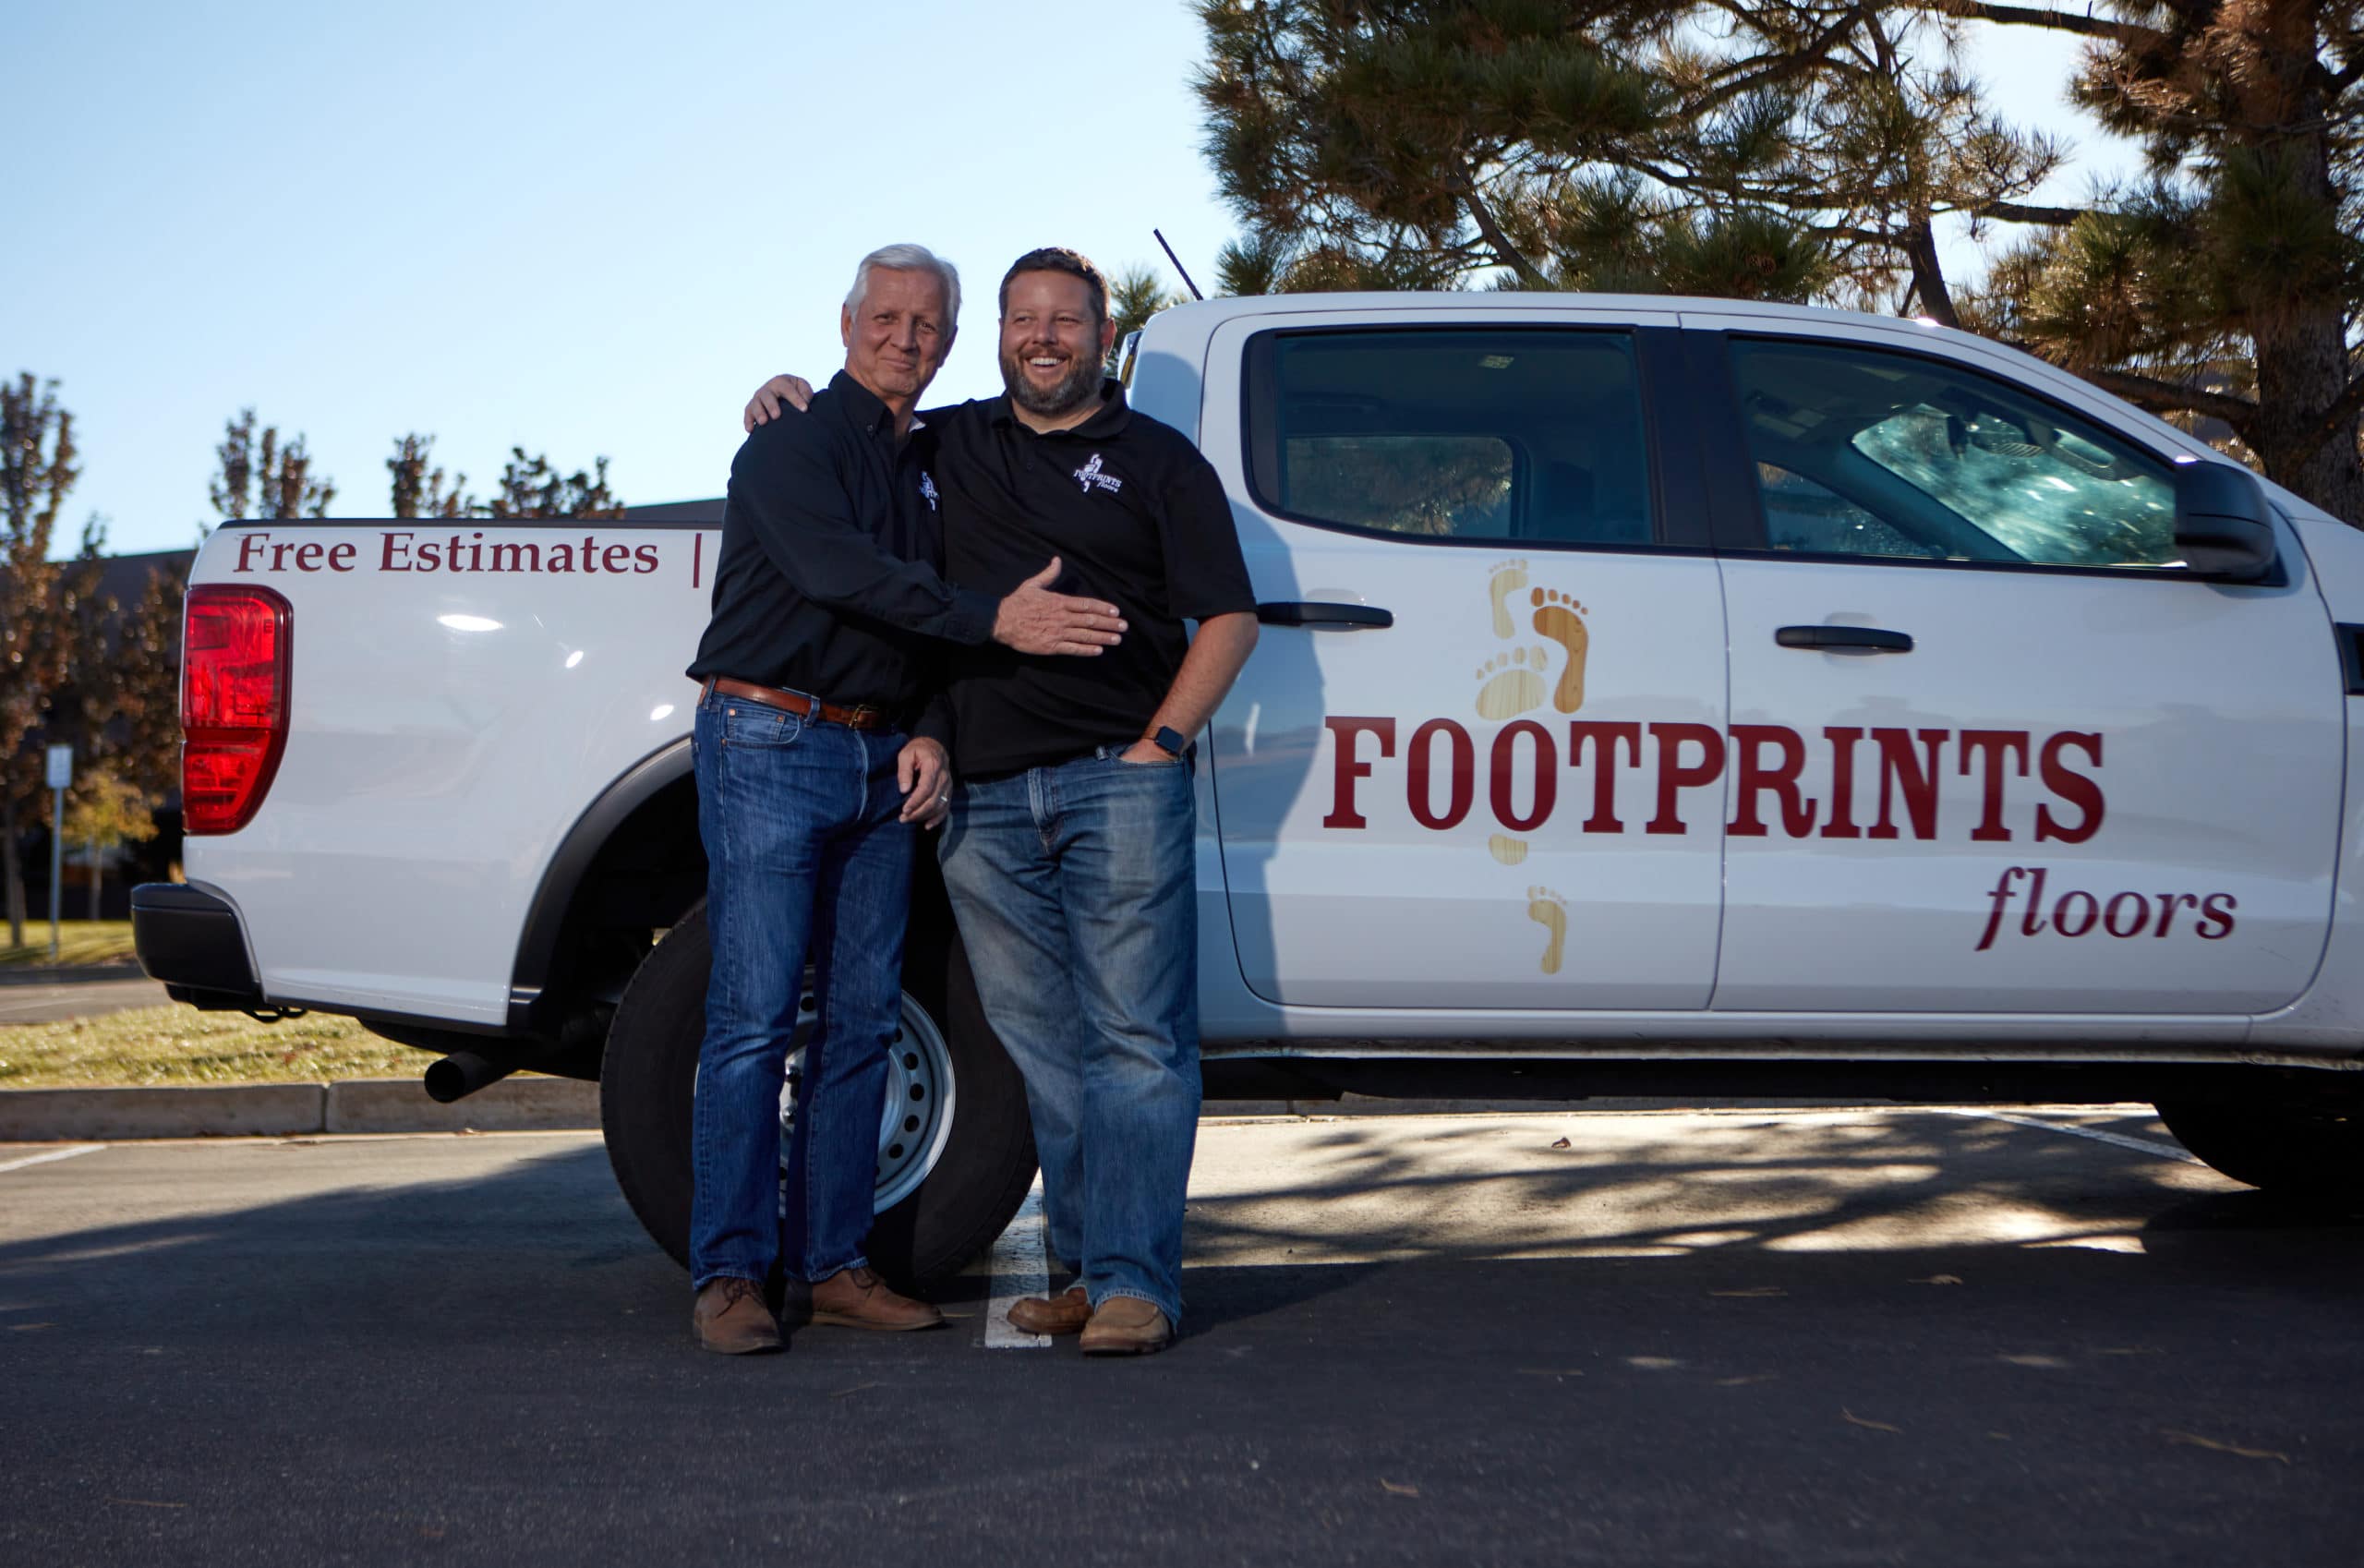 Footprints Floors semi-absentee franchise owner standing in front of truck.